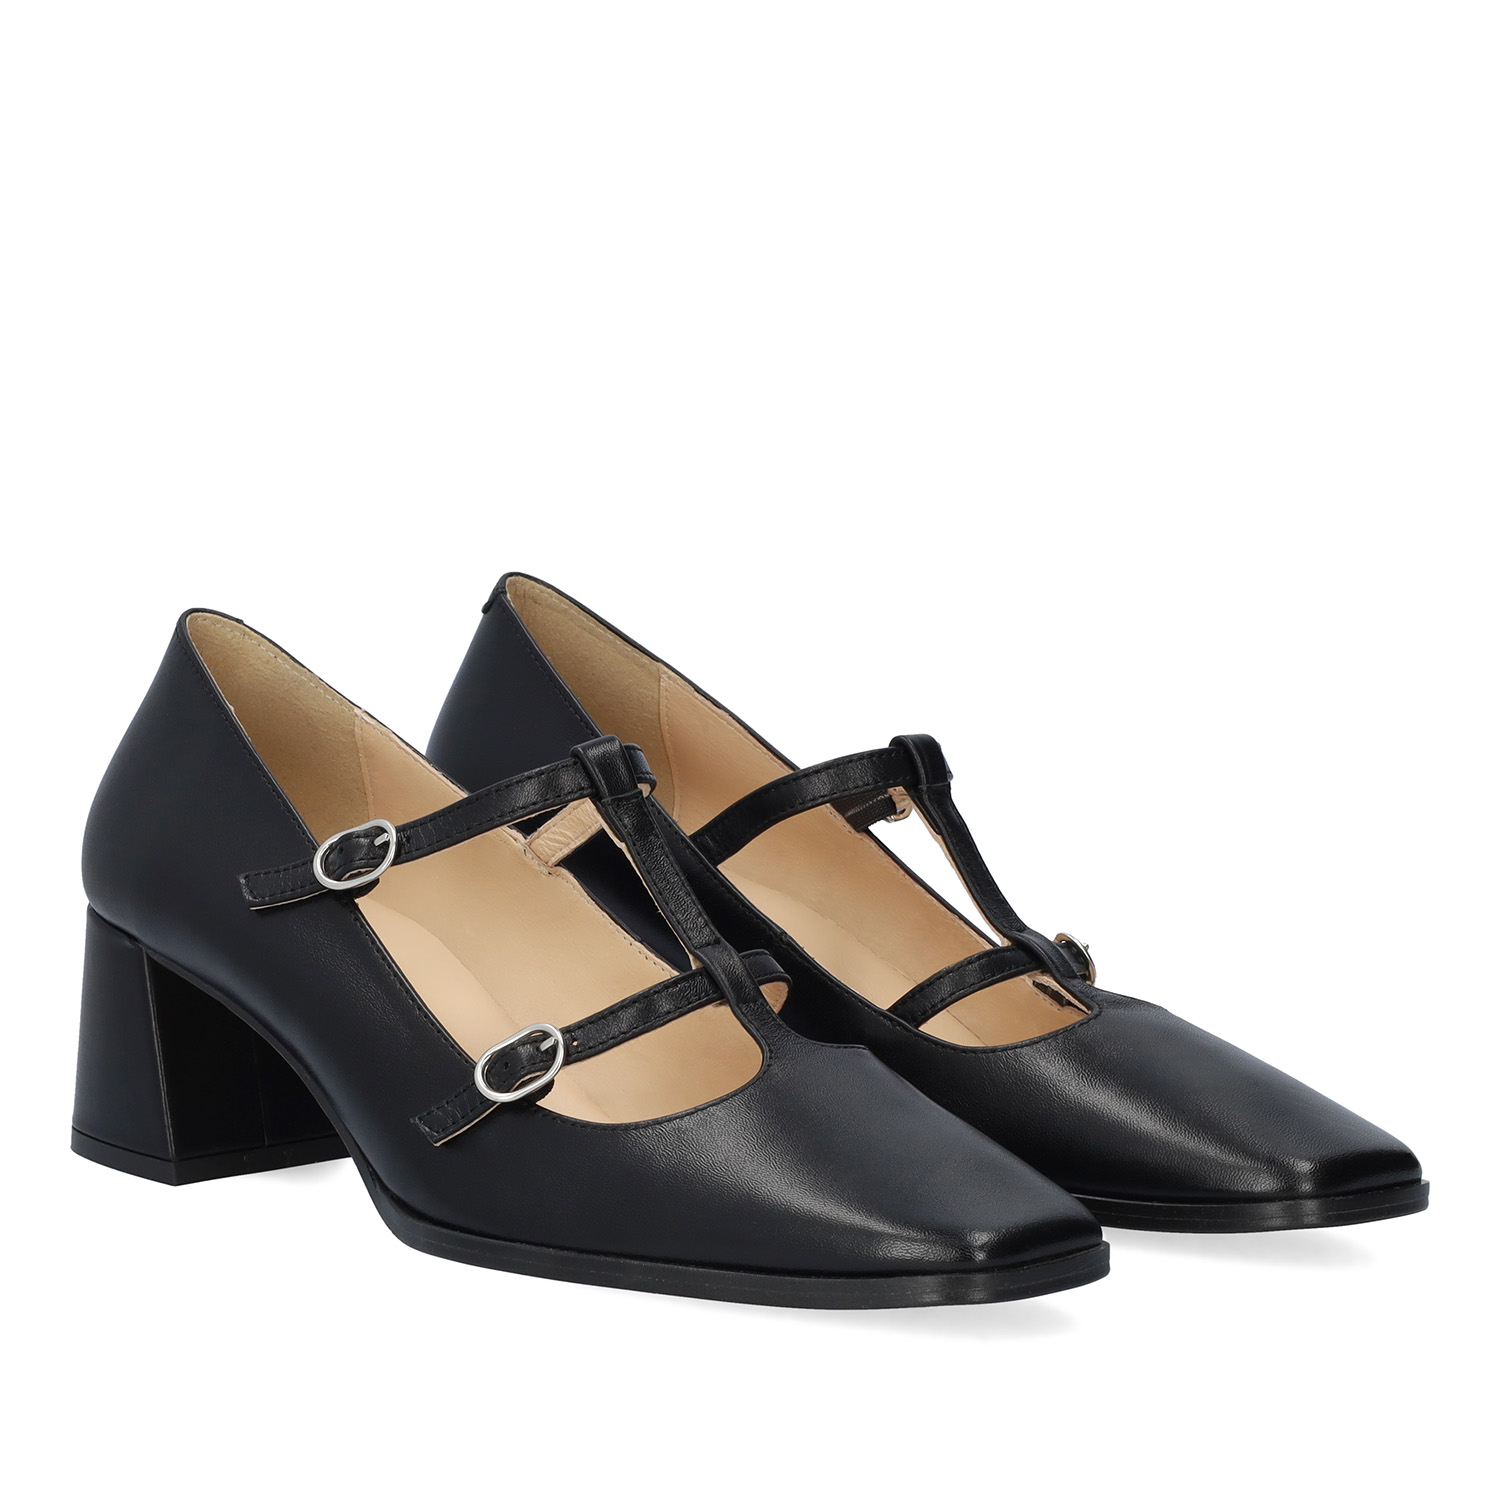 Court black leather heeled shoes. 